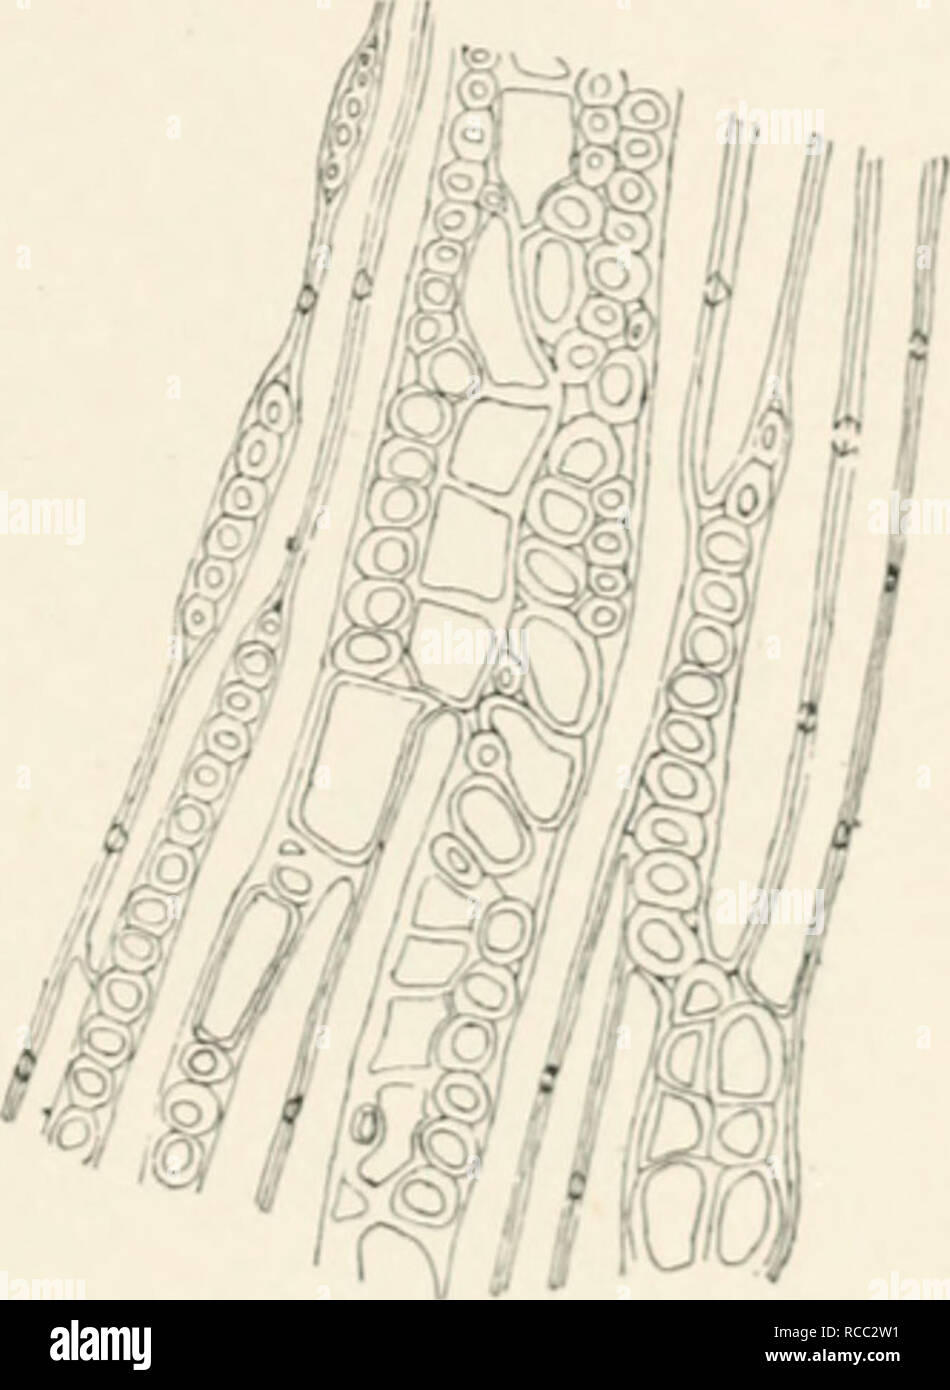 . Diseases of plants induced by cryptogamuc parasites; introduction to the study of pathogenic fungi, slime-fungi, bacteria, and algae. English ed. by William G. Smith. Plant diseases; Parasitic plants. f;YMXOSPORANGirM. 389 fissure-like pores in place of bordered pits. The wood-elements in cross-section are no longer round but polygonal: the bast becomes very irregular, parenchyma grows rapidly, bast fibres remain thin-walled and have no longer a straight course. The mycelium tills the bast and rind, forming masses in the inter- cellular spaces ; it is easiest found in the tangential section. Stock Photo